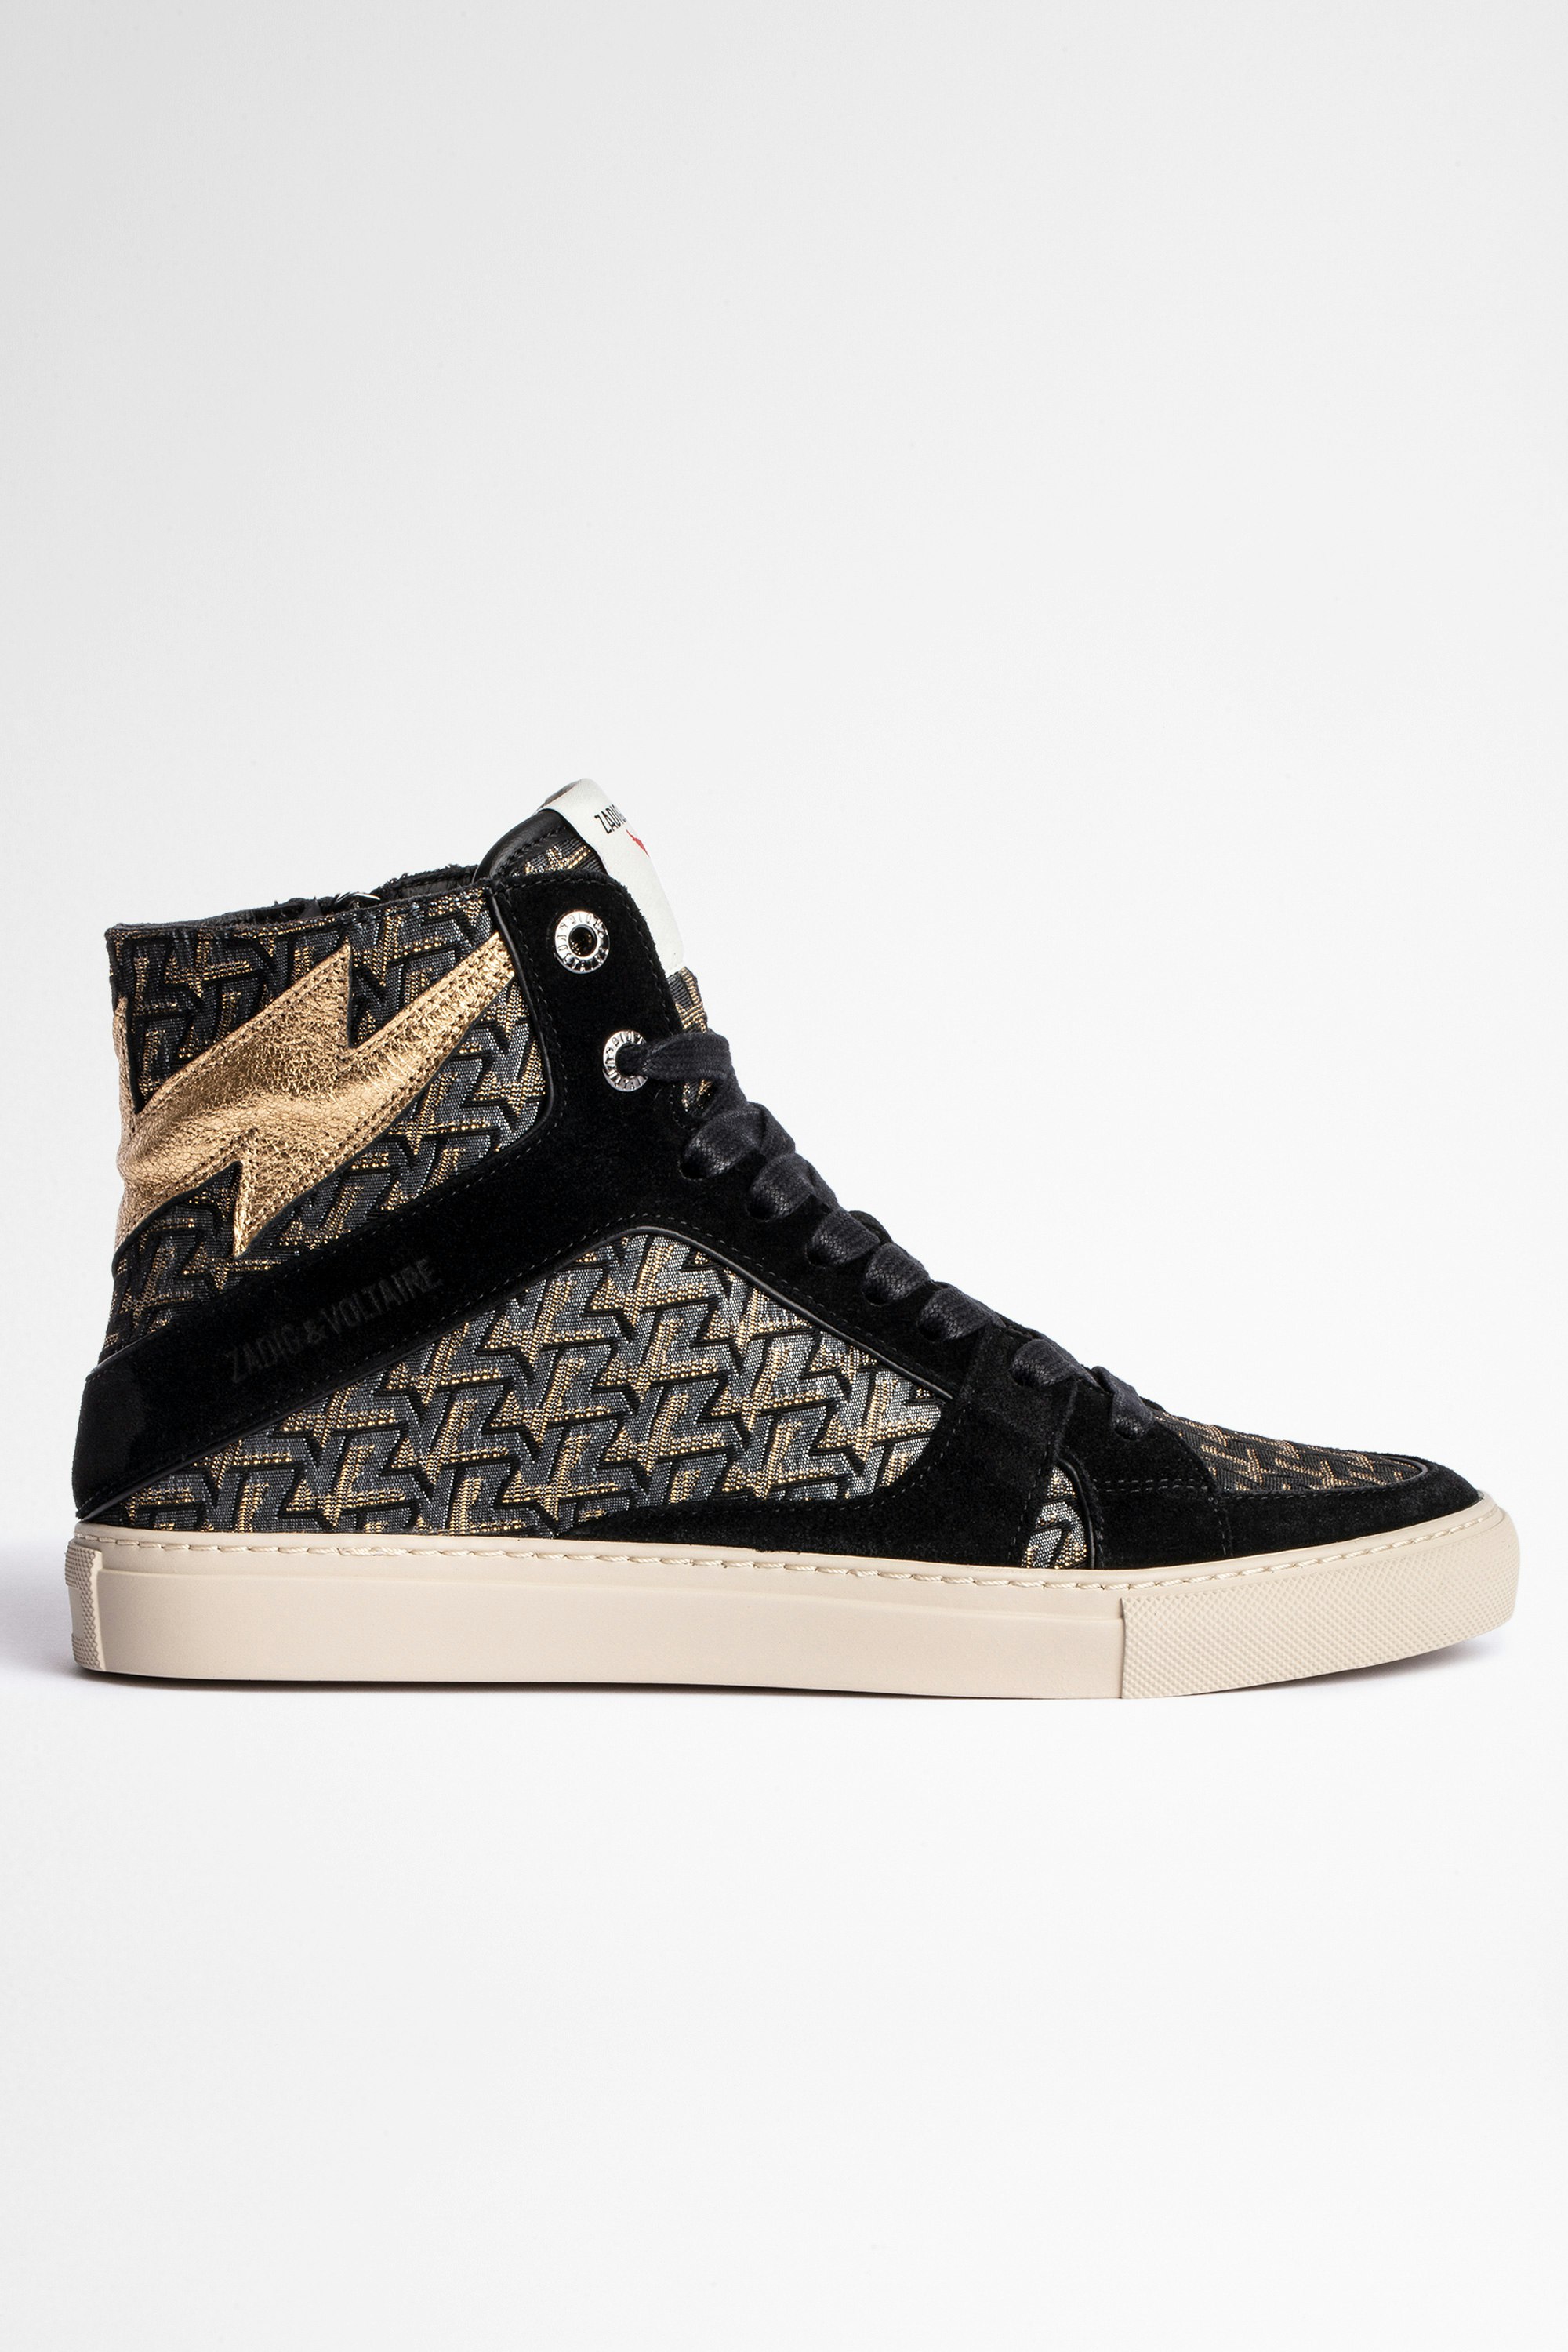 ZV1747 High Flash Metal Sneakers Women's high-top sneakers in leather and ZV street jacquard